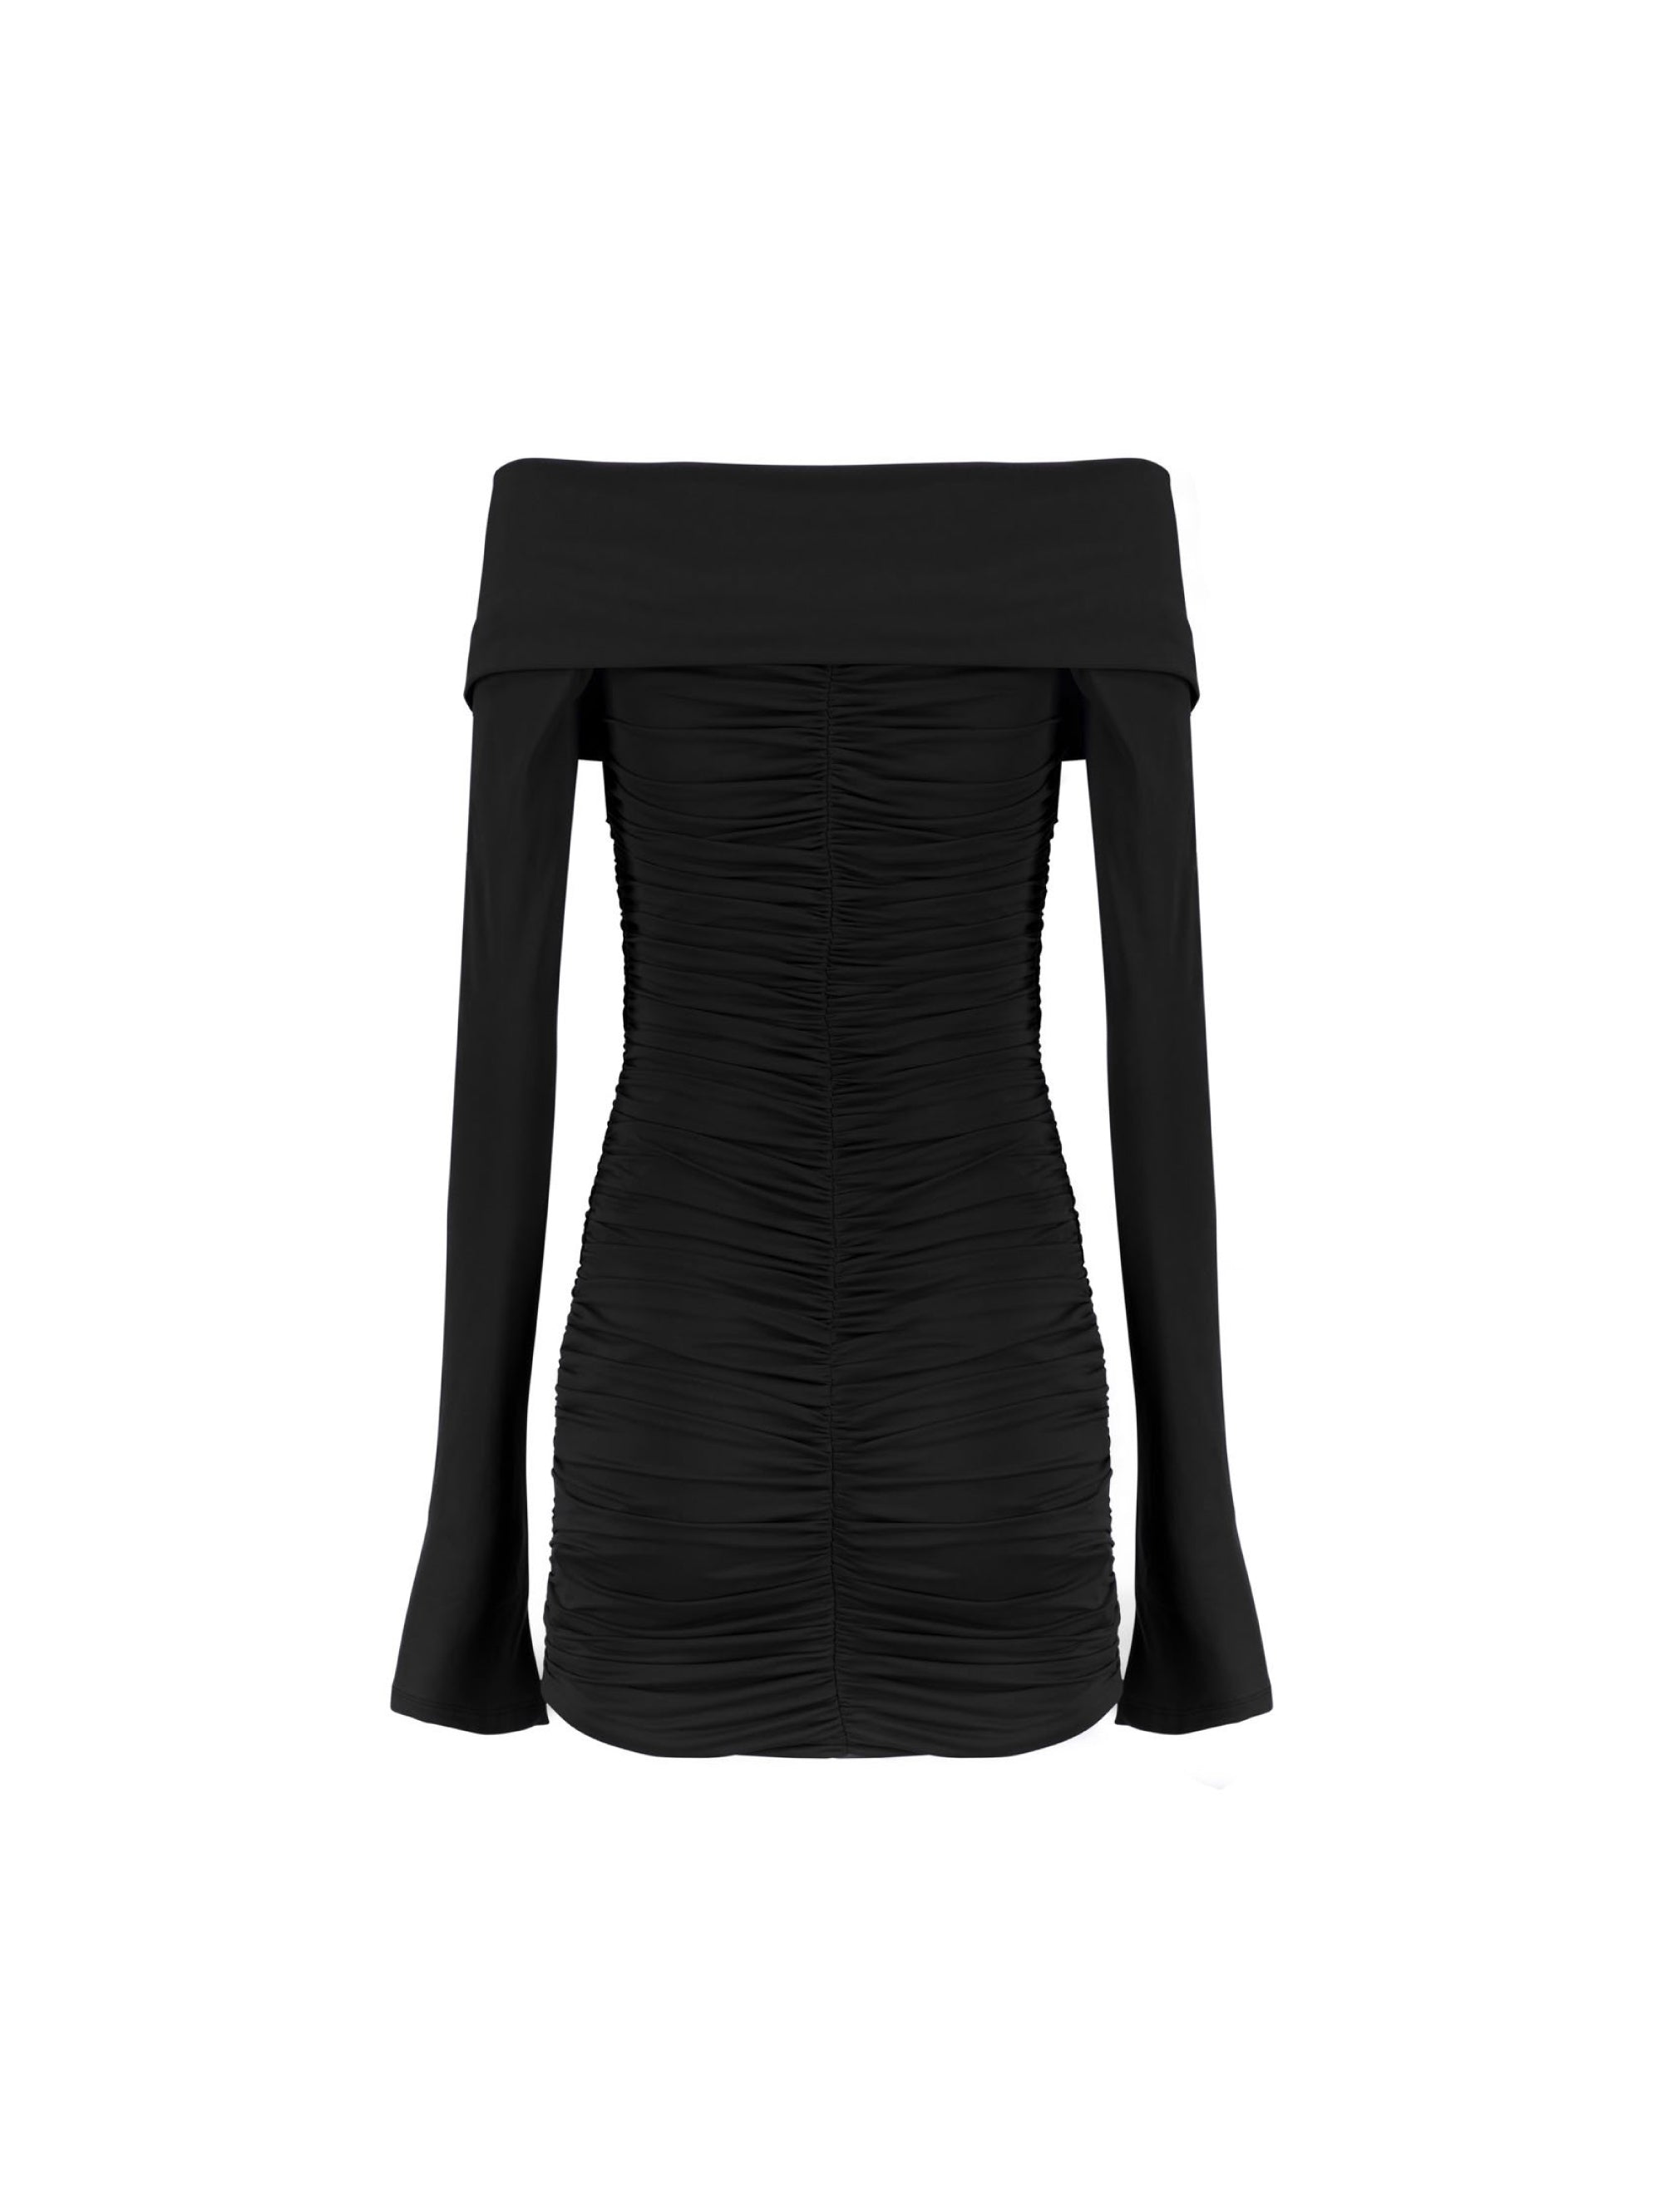 Black Pleated Dress with Long Sleeves